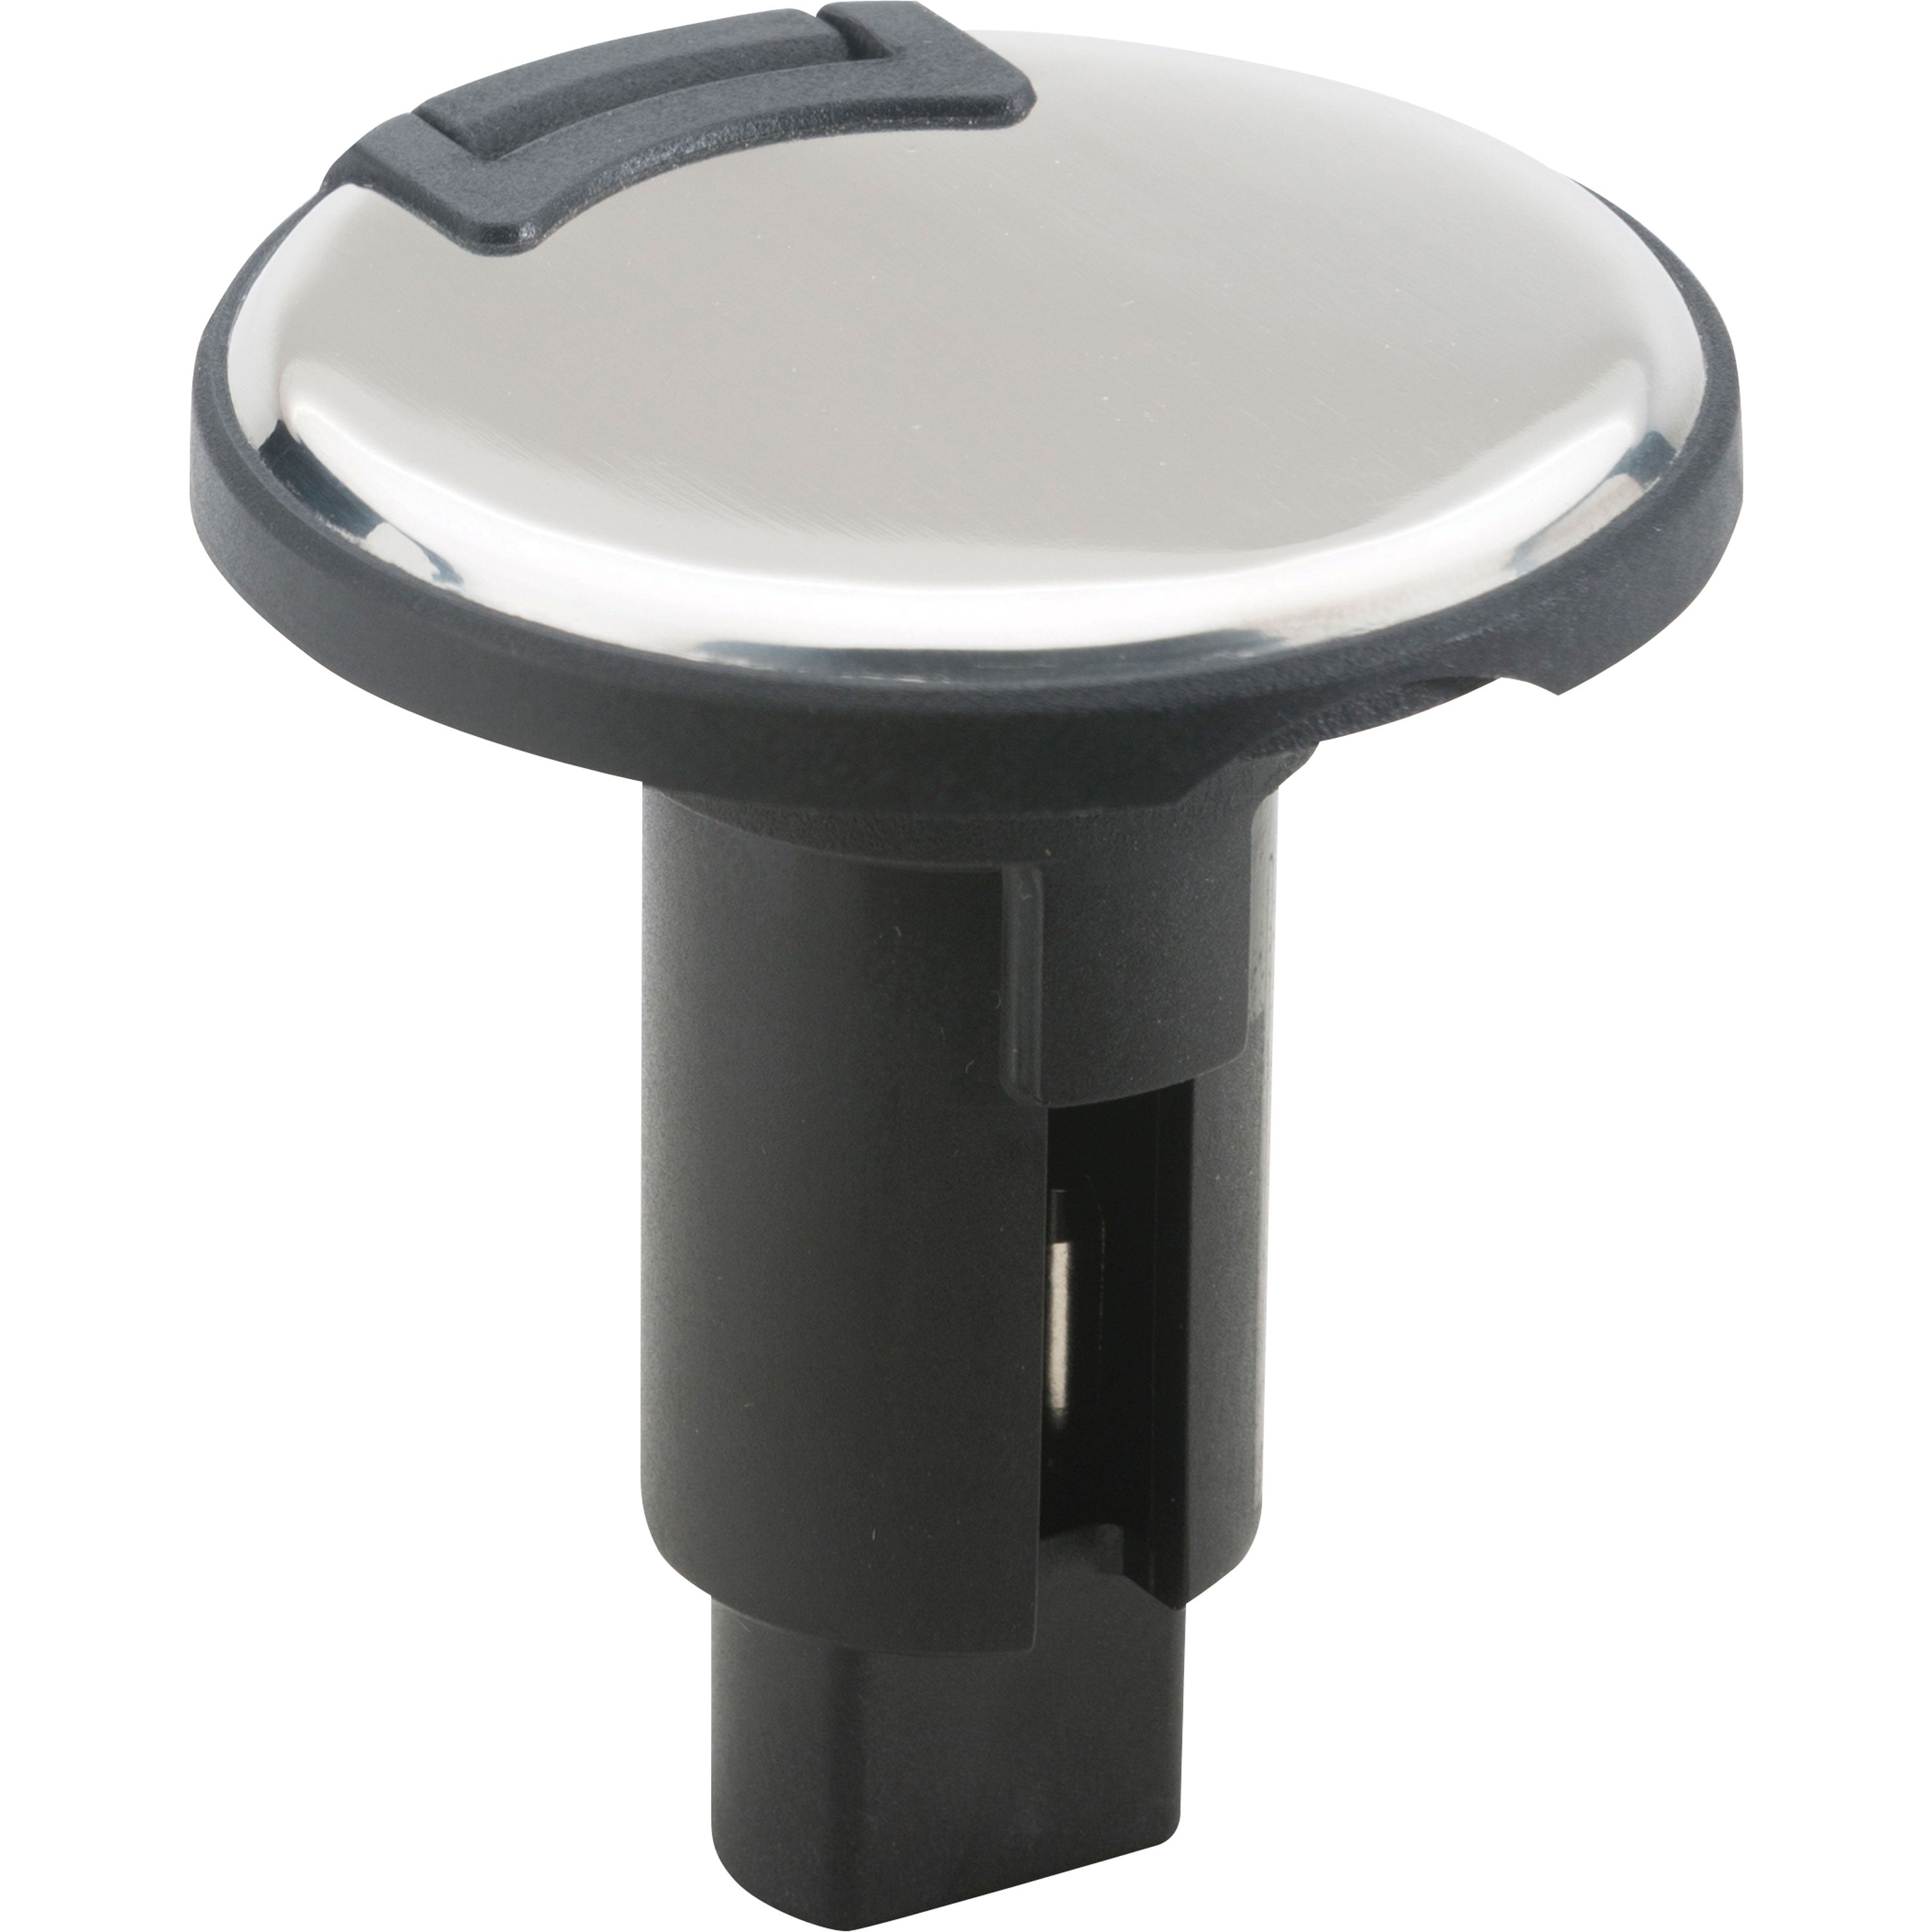 Attwood 910R2PSB-7 LightArmor 910R Series Round 2-Pin Light Base - Overmold 306 SS, Black Cover